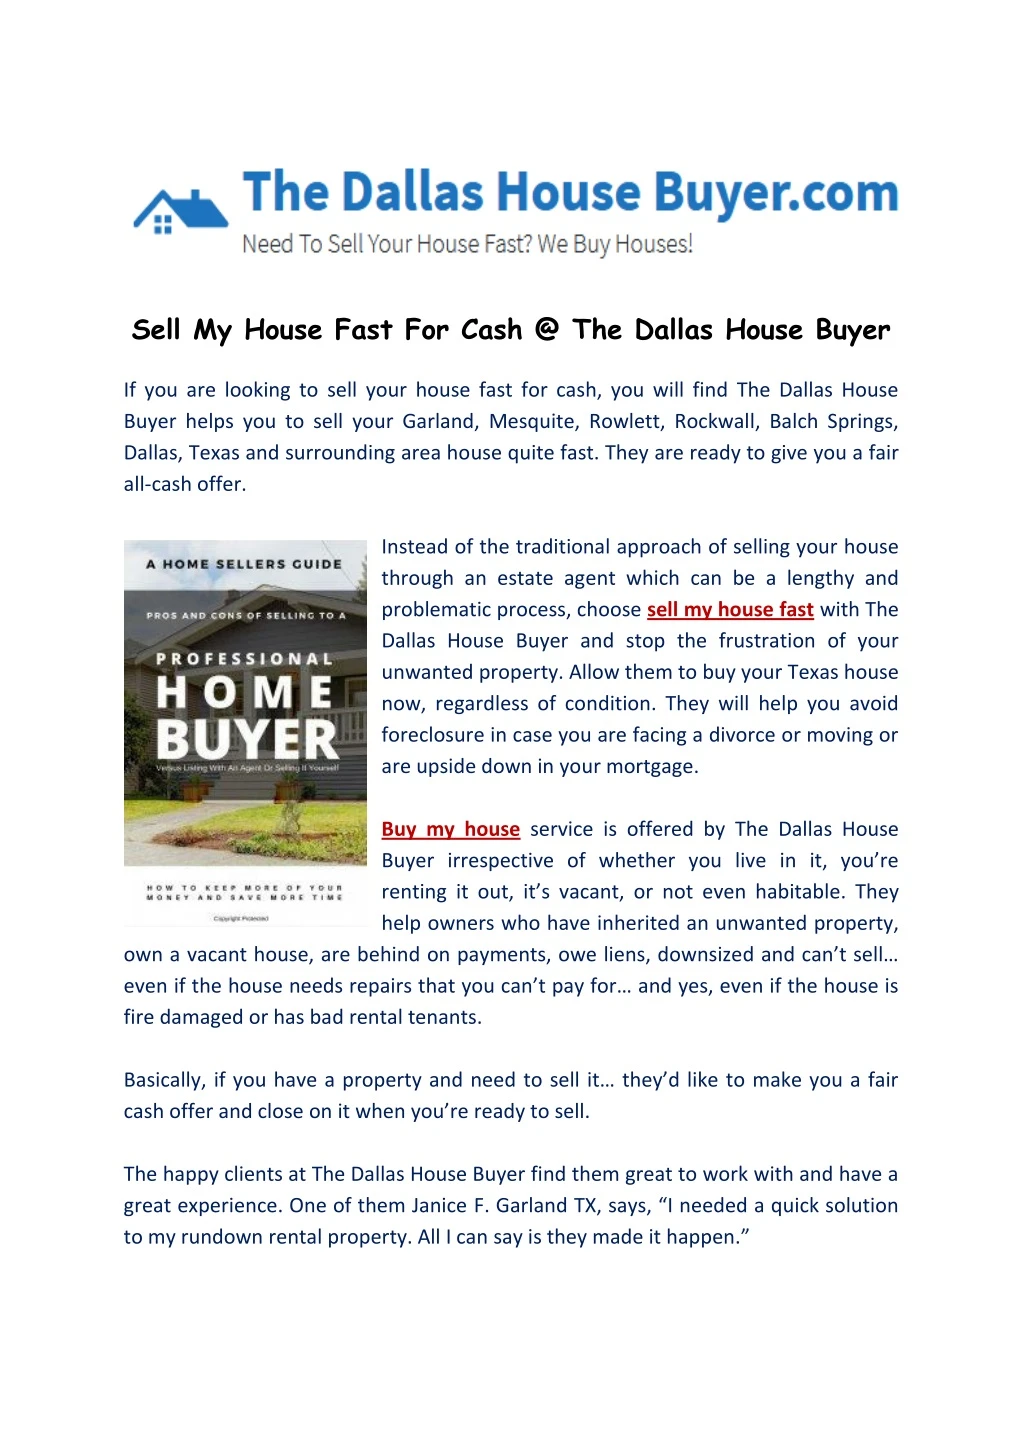 sell my house fast for cash @ the dallas house